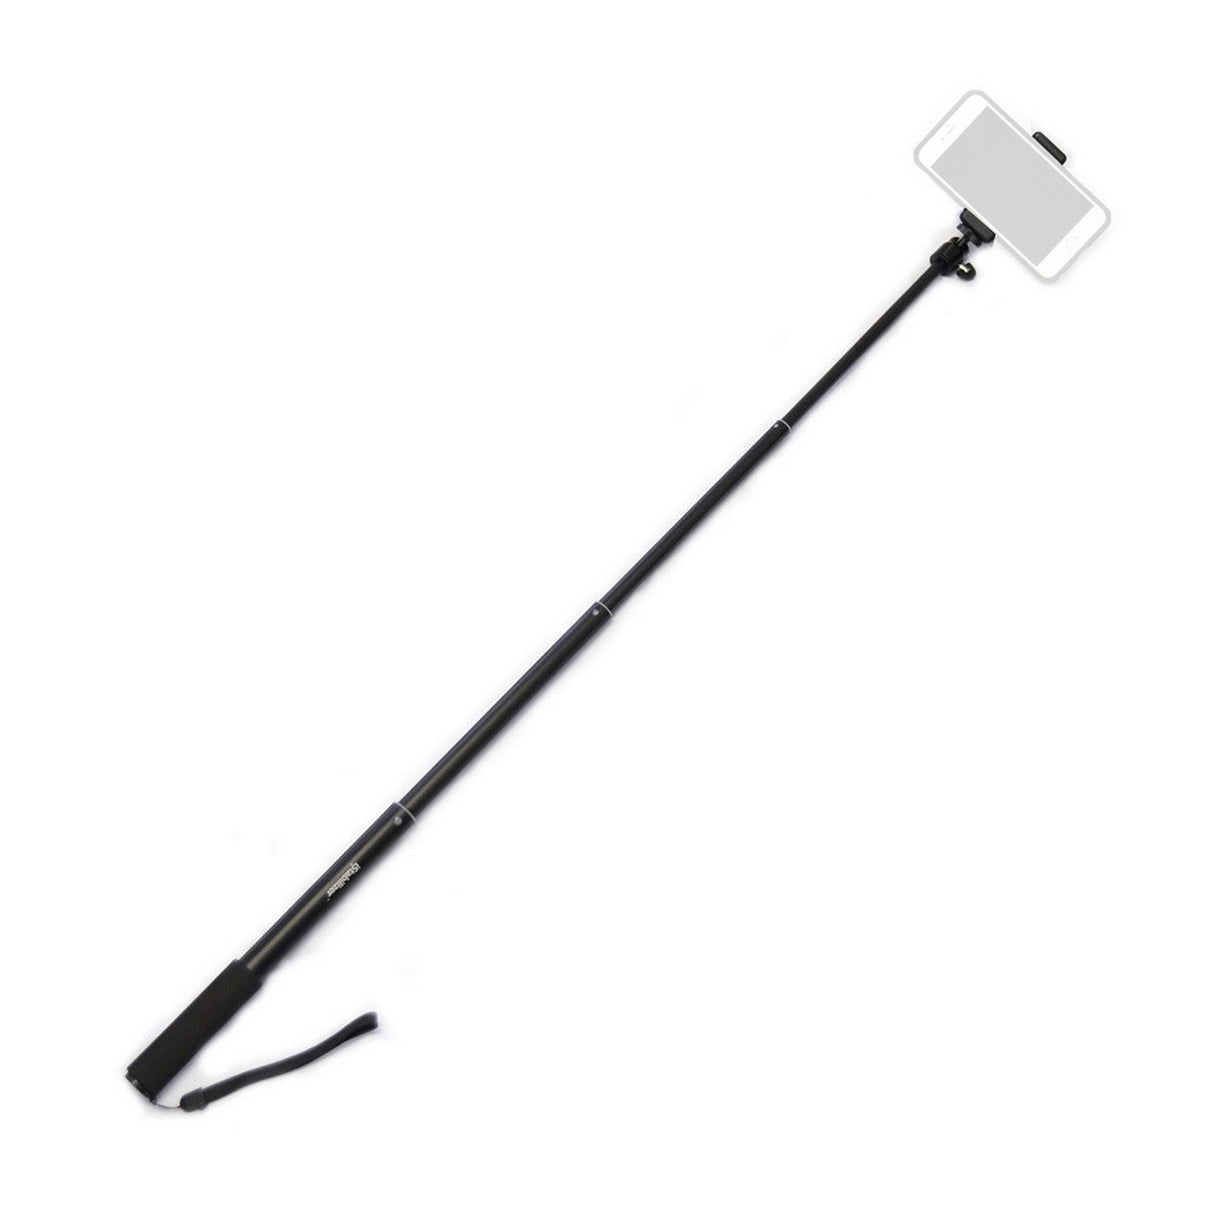 iStabilizer Monopod | Smartphone Mount Selfie Stick for iPhone 4 4S 5 5C 5S 6 6 Plus 6S 6S Plus Galaxy Note Galaxy S